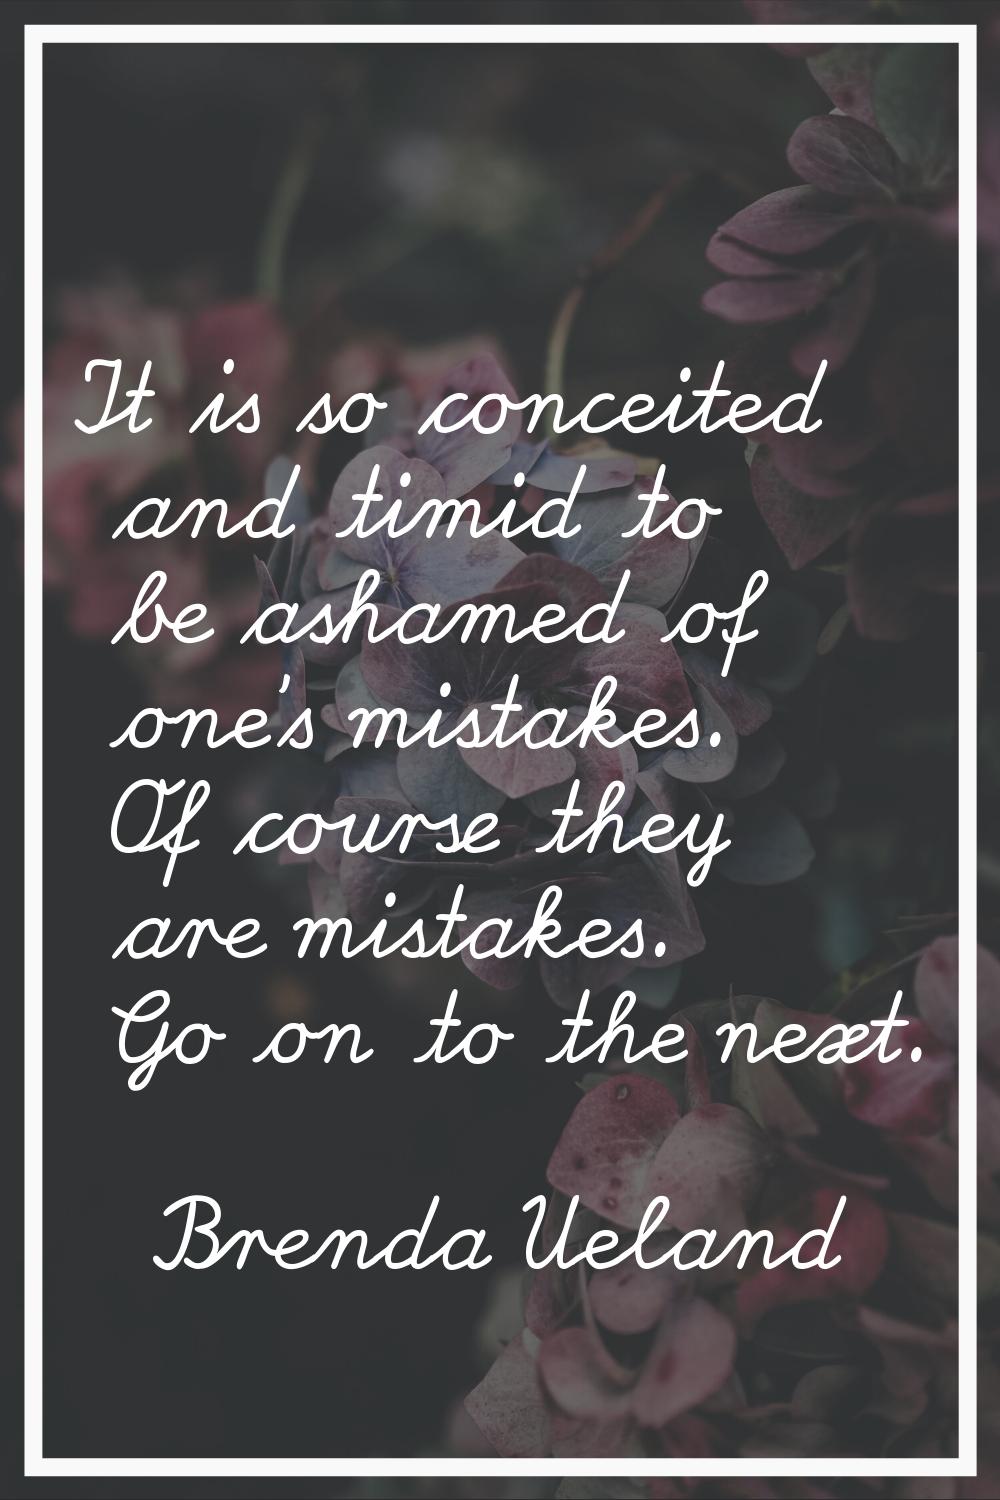 It is so conceited and timid to be ashamed of one's mistakes. Of course they are mistakes. Go on to